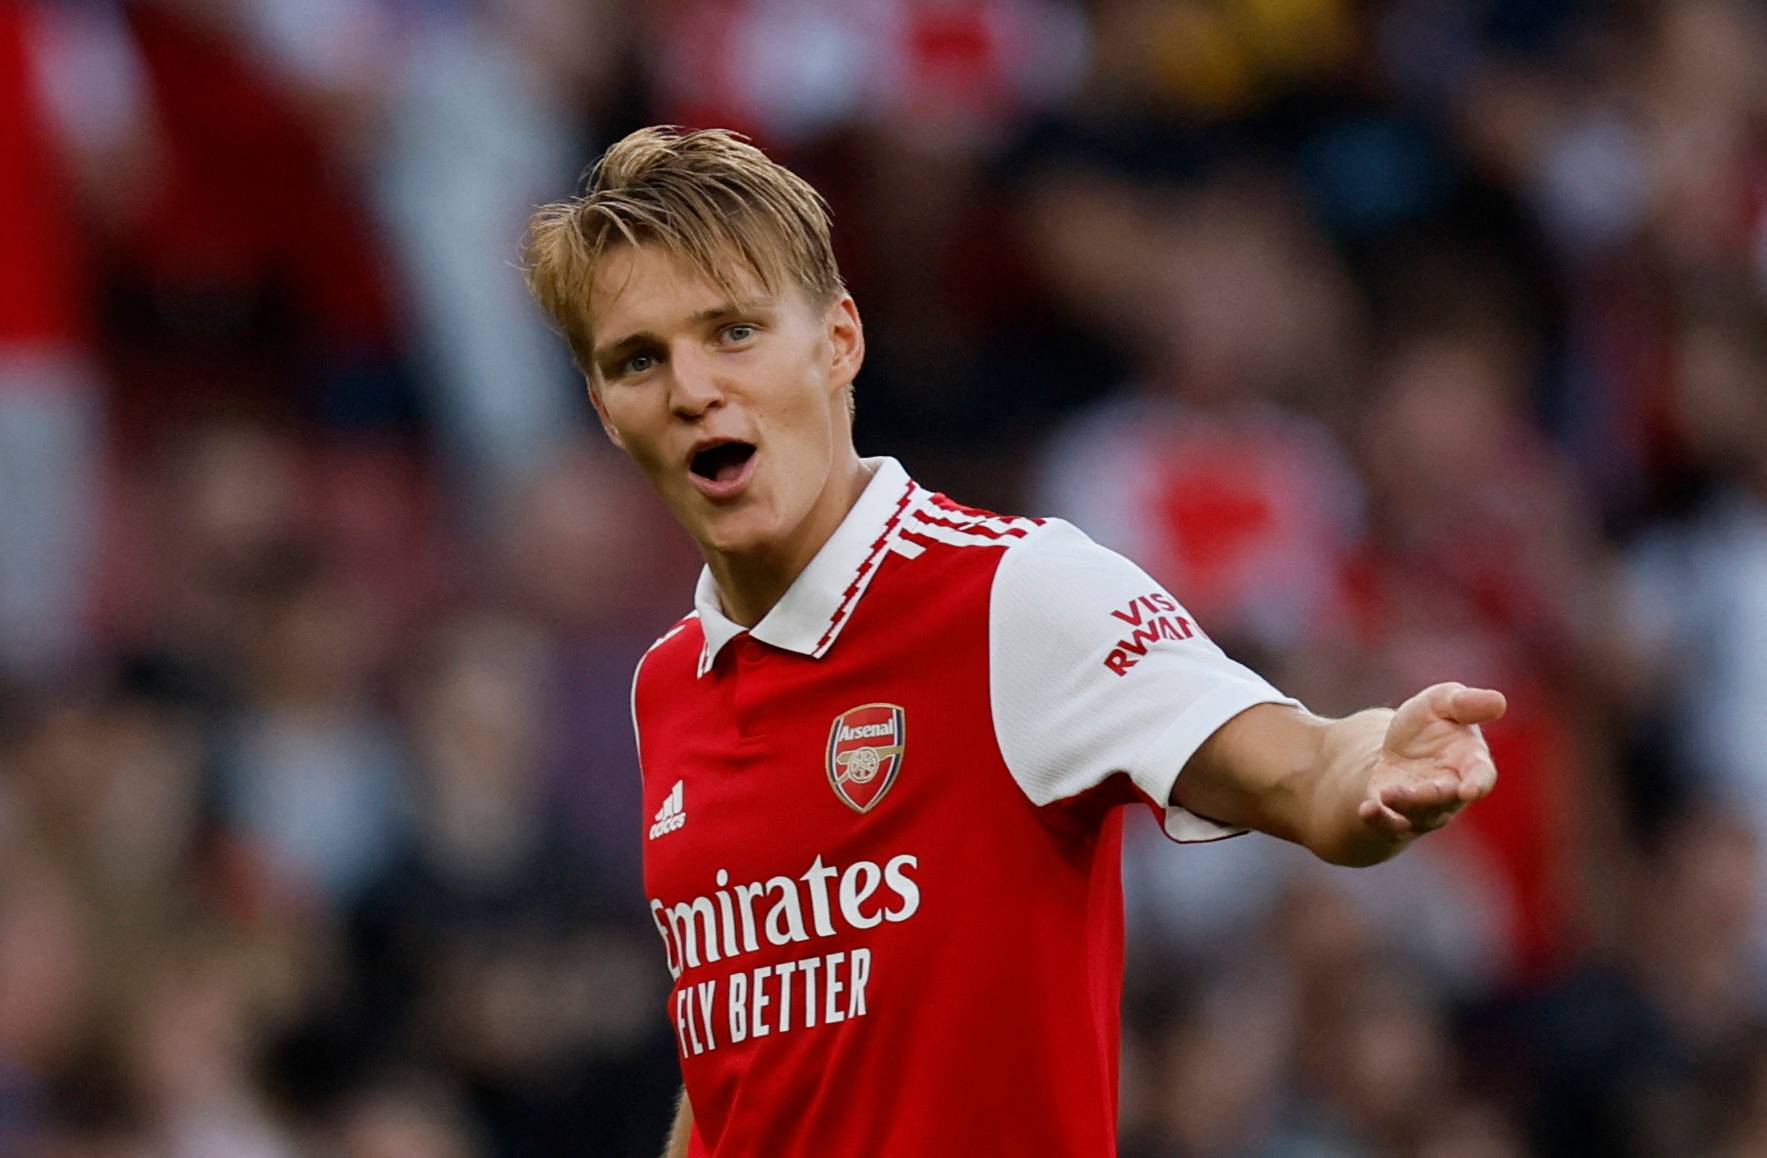 Arsenal: Odegaard labelled 'poor' by Charles Watts - Arsenal News